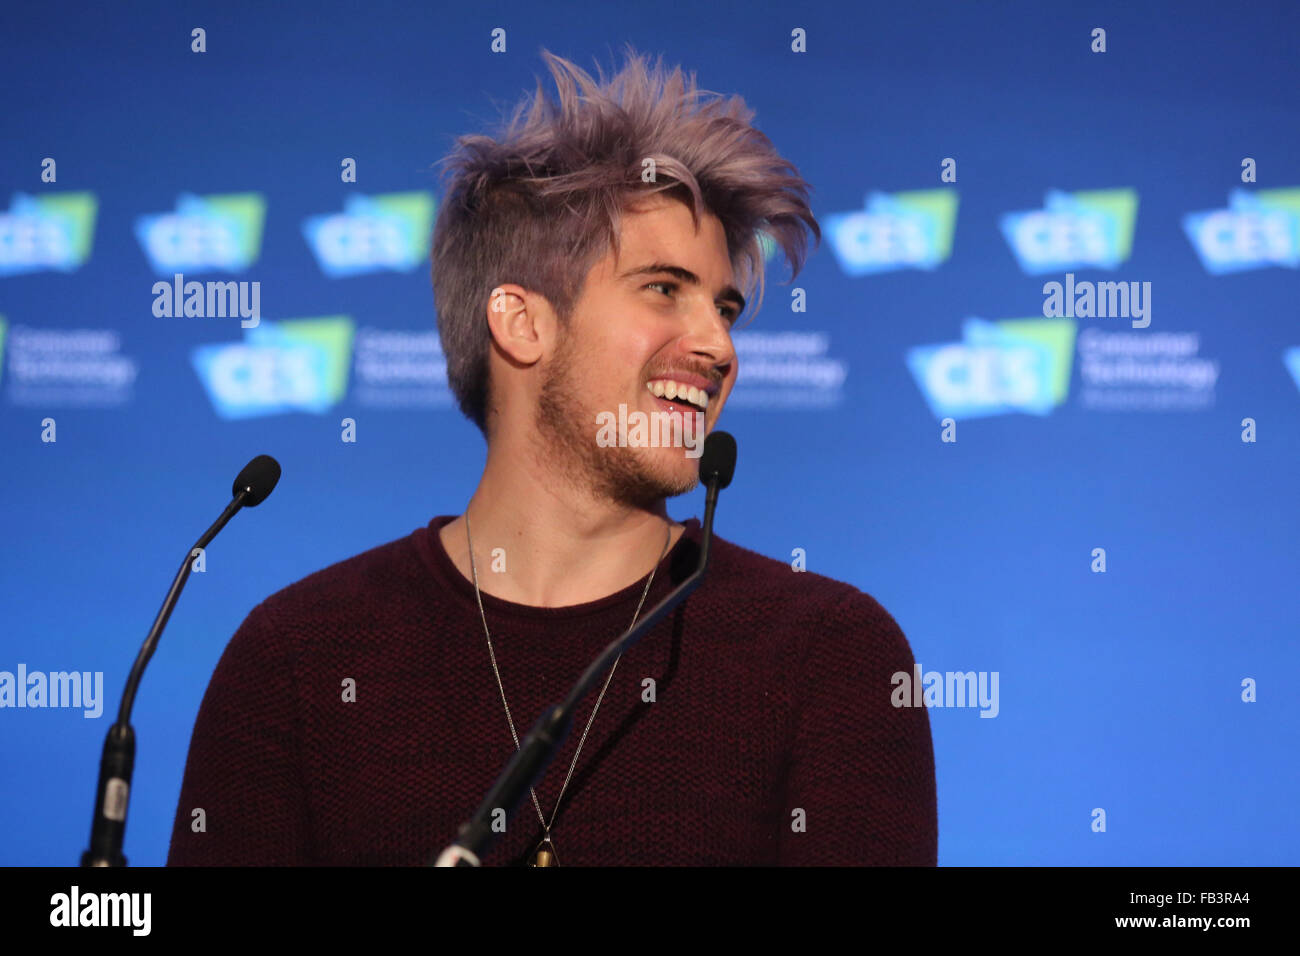 Las Vegas, Nevada, USA. 6th Jan, 2016. Social media and YouTube personalities Joey Graceffa and Justine (''iJustine'') Ezarik served as panelists on ''Digital Stars: Influencing Consumer Electronic Consumers''. An estimated 165,000 industry professionals descended on Las Vegas, Nevada the week of January 6-9, 2016 for the Consumer Electronics Show. Credit:  Craig Durling/ZUMA Wire/Alamy Live News Stock Photo